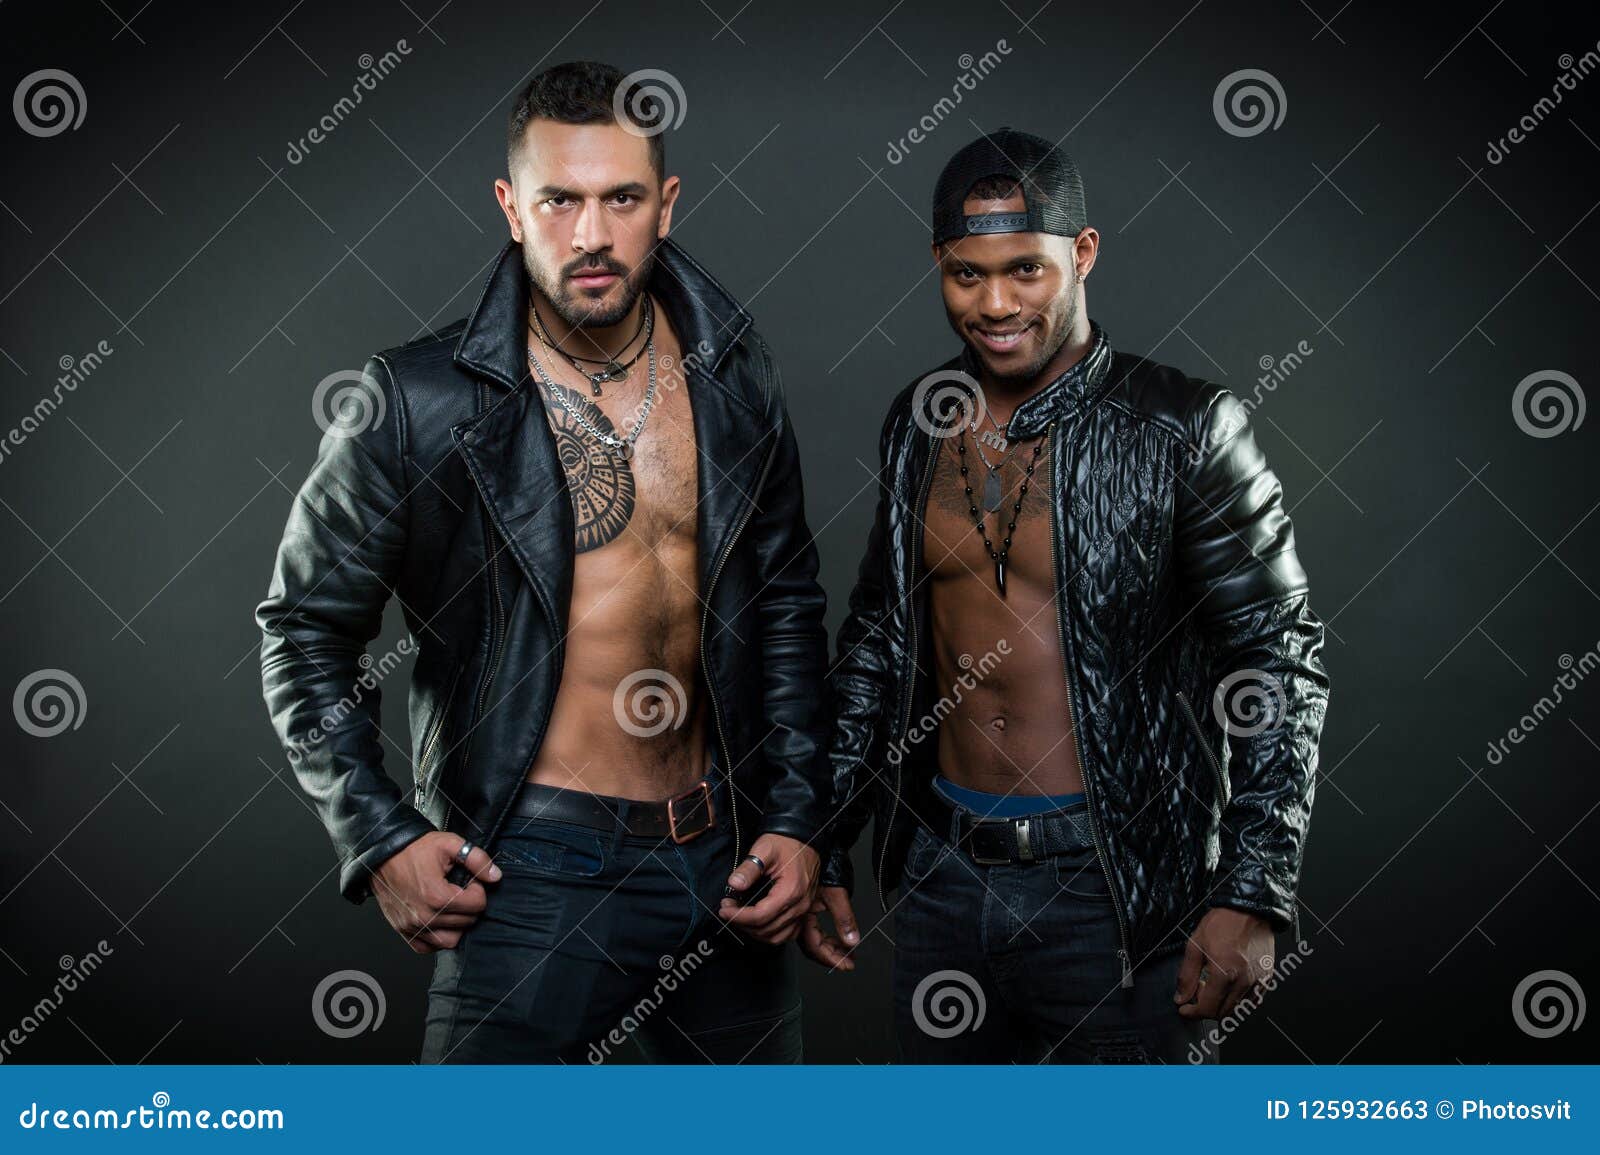 machos with muscular torsos look attractive in leather jackets, dark background. masculinity and brutality concept. men